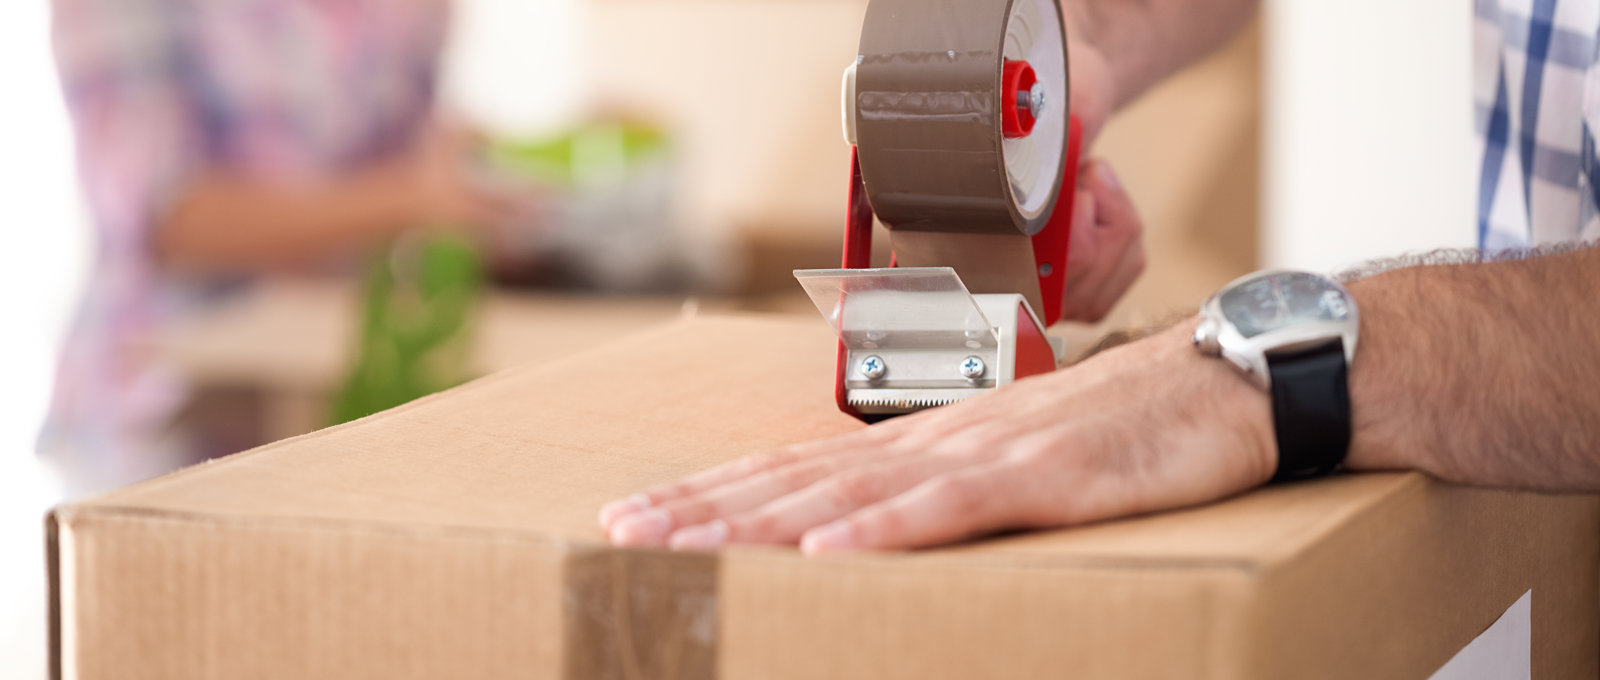 Close up photograph of a man sealing up a packing box with tape.